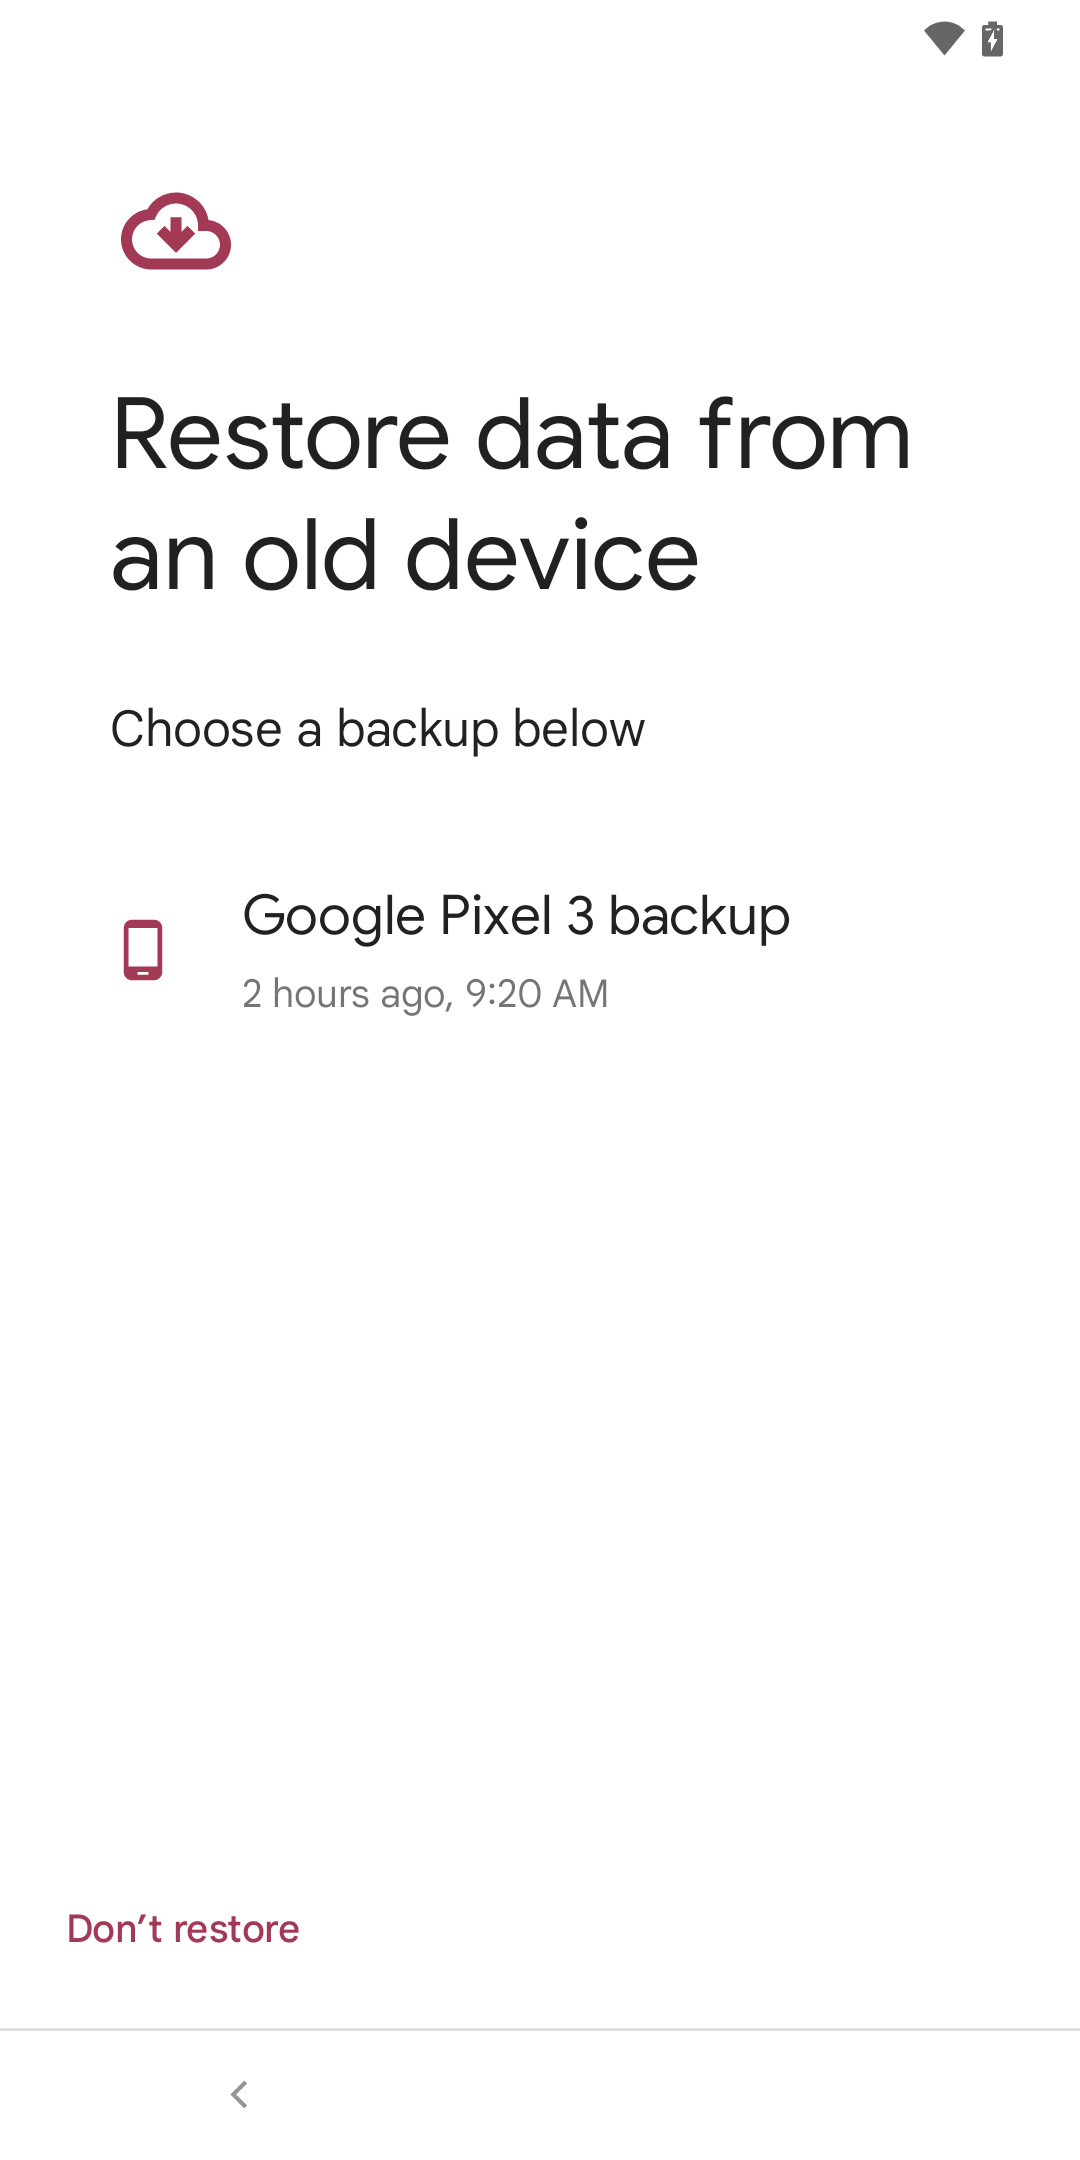 Page: Recover data from an old device